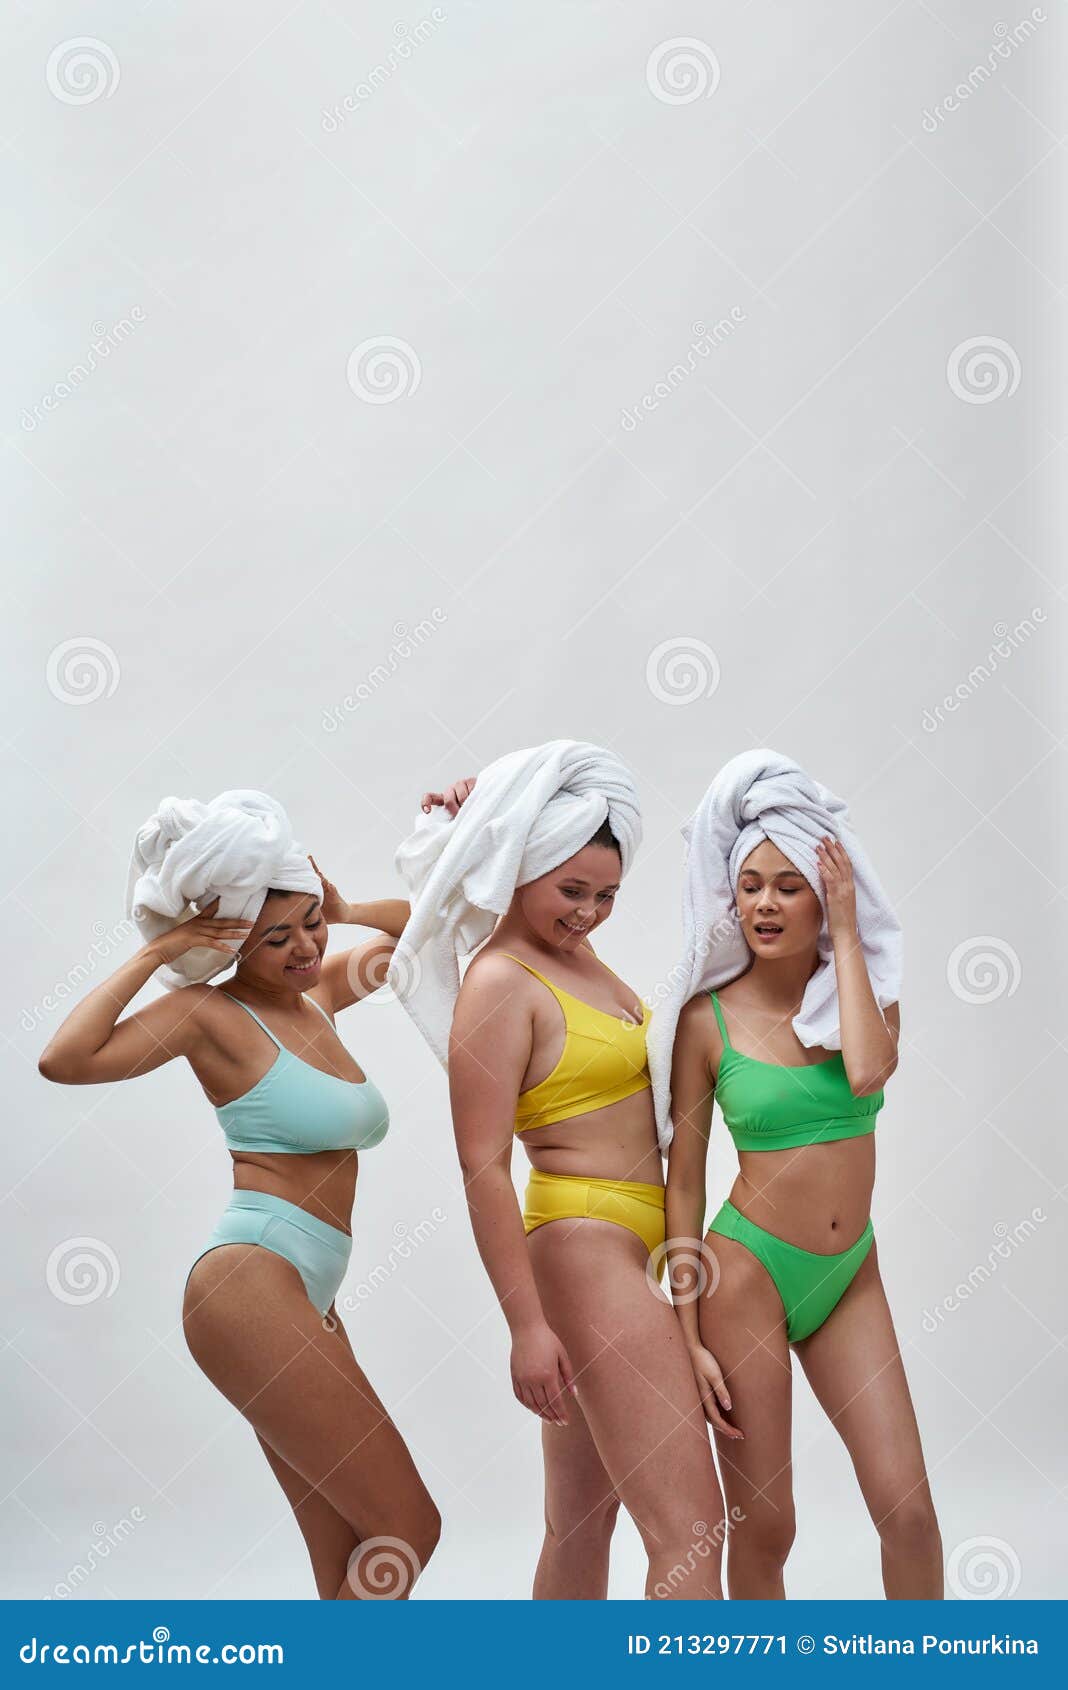 Three Joyful Young Women with Different Body Shapes Wearing